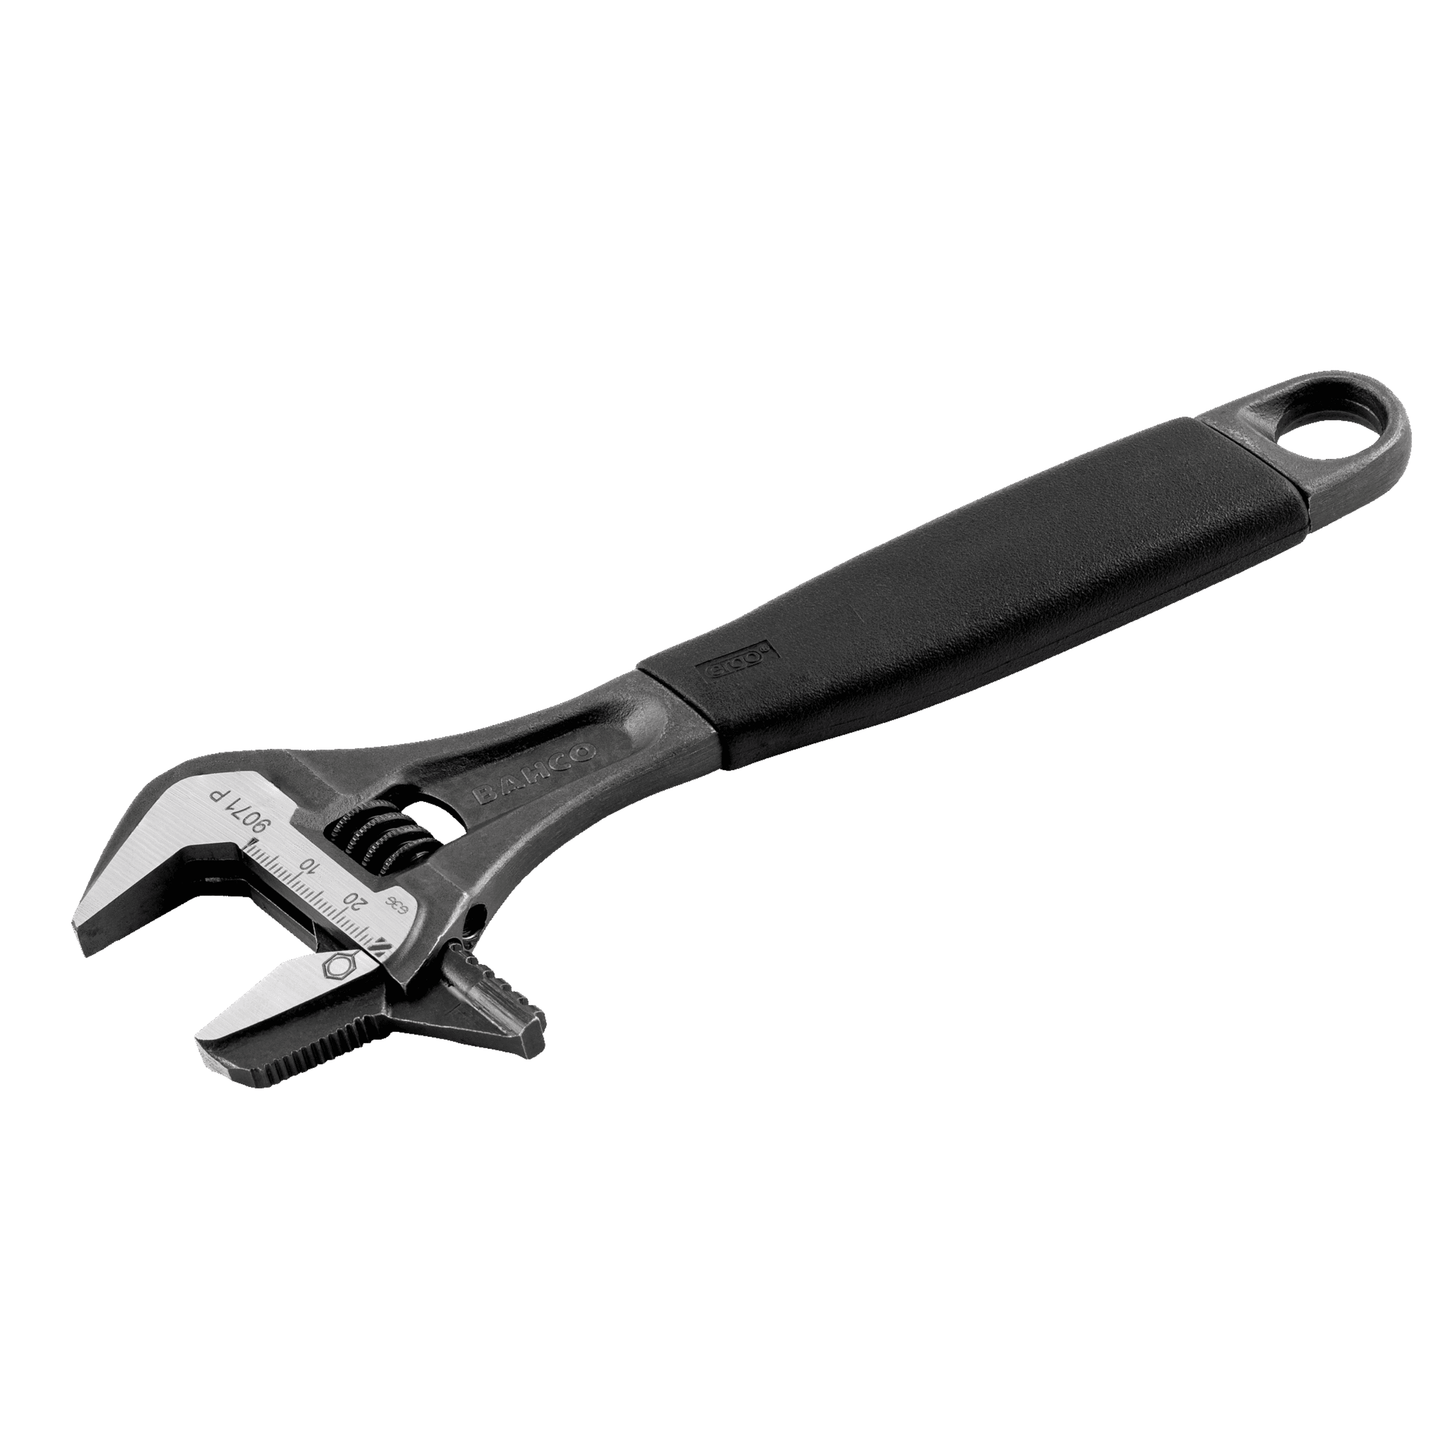 Bahco 12" SAE Ergo™ Combination Adjustable/Pipe Wrench